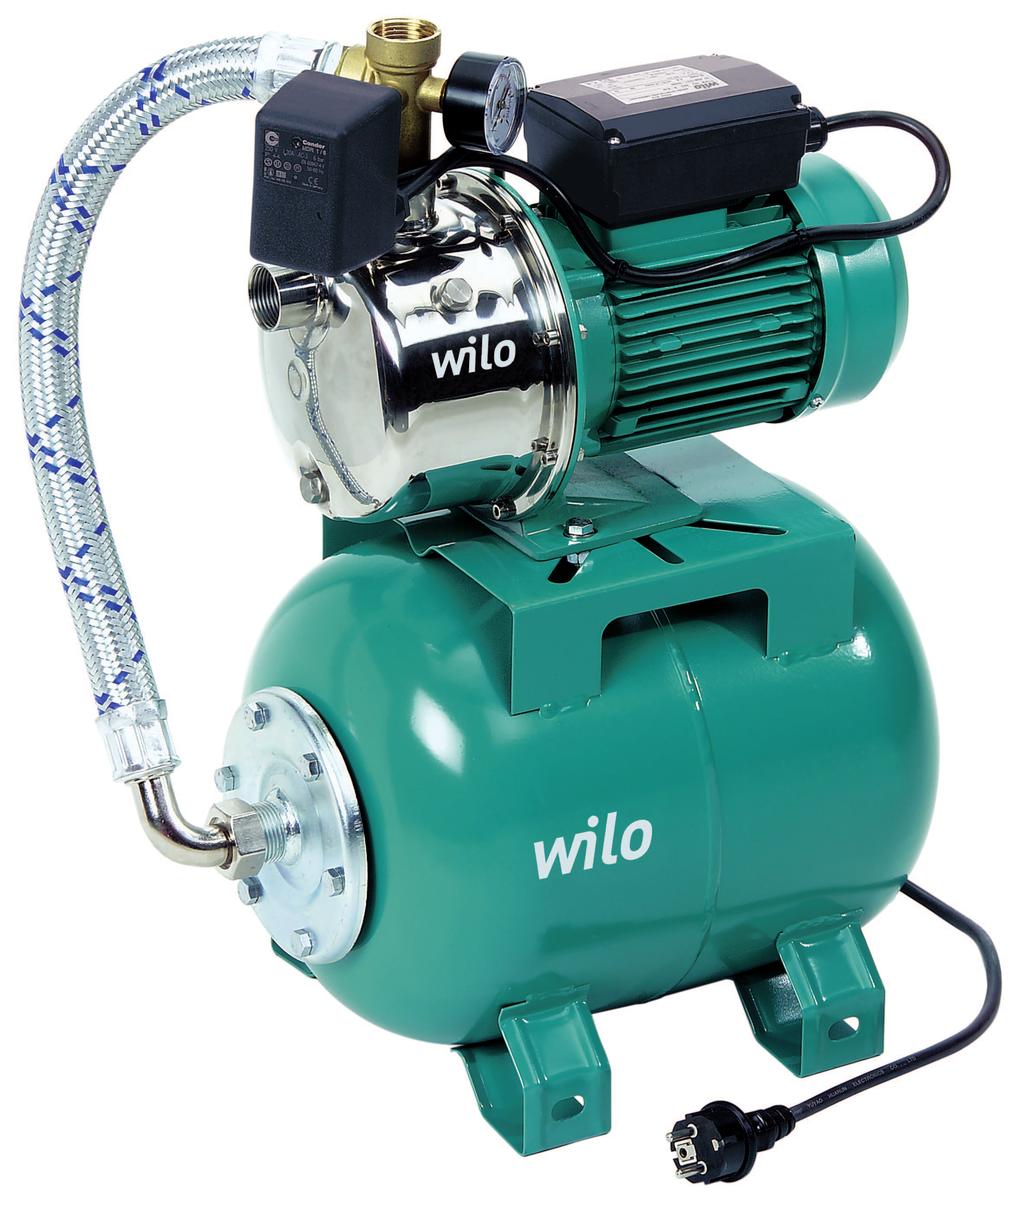 Series description: HWJ 2 Design Self-priming water-supply unit Application Water supply Sprinkling Irrigation and spraying Pumping water from wells and out of low-lying tanks Type key Example: H WJ